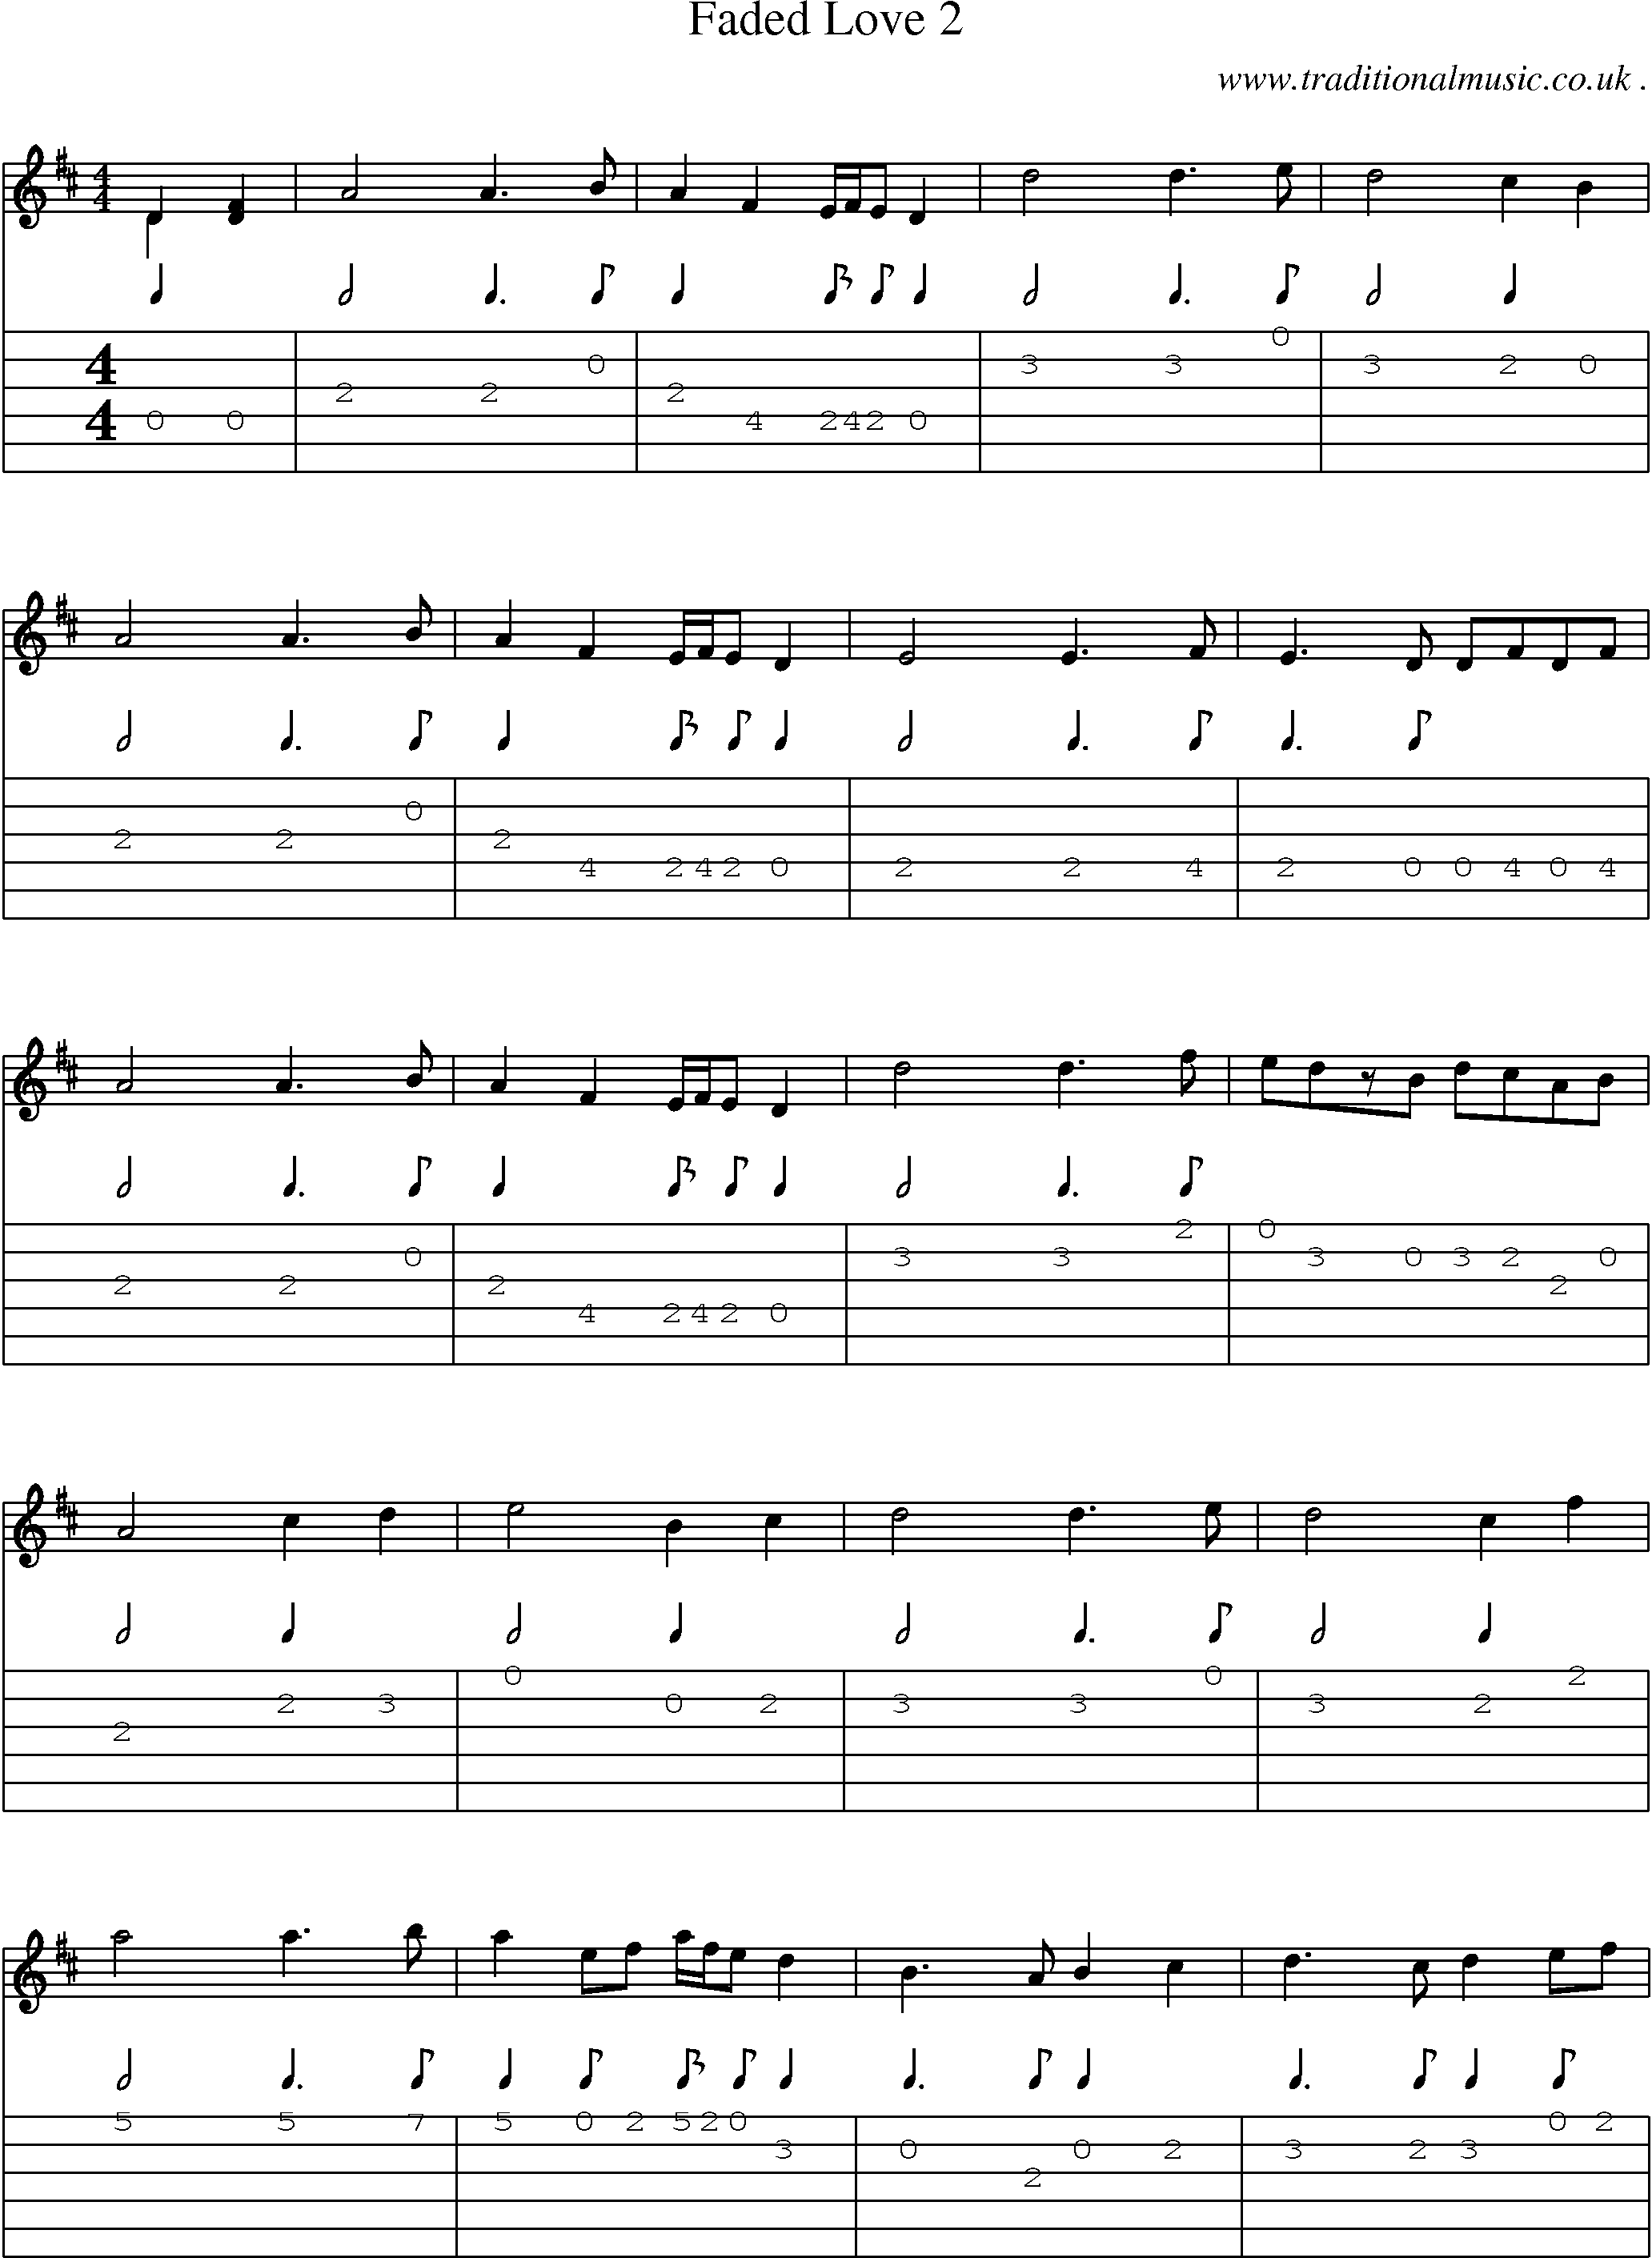 Music Score and Guitar Tabs for Faded Love 2